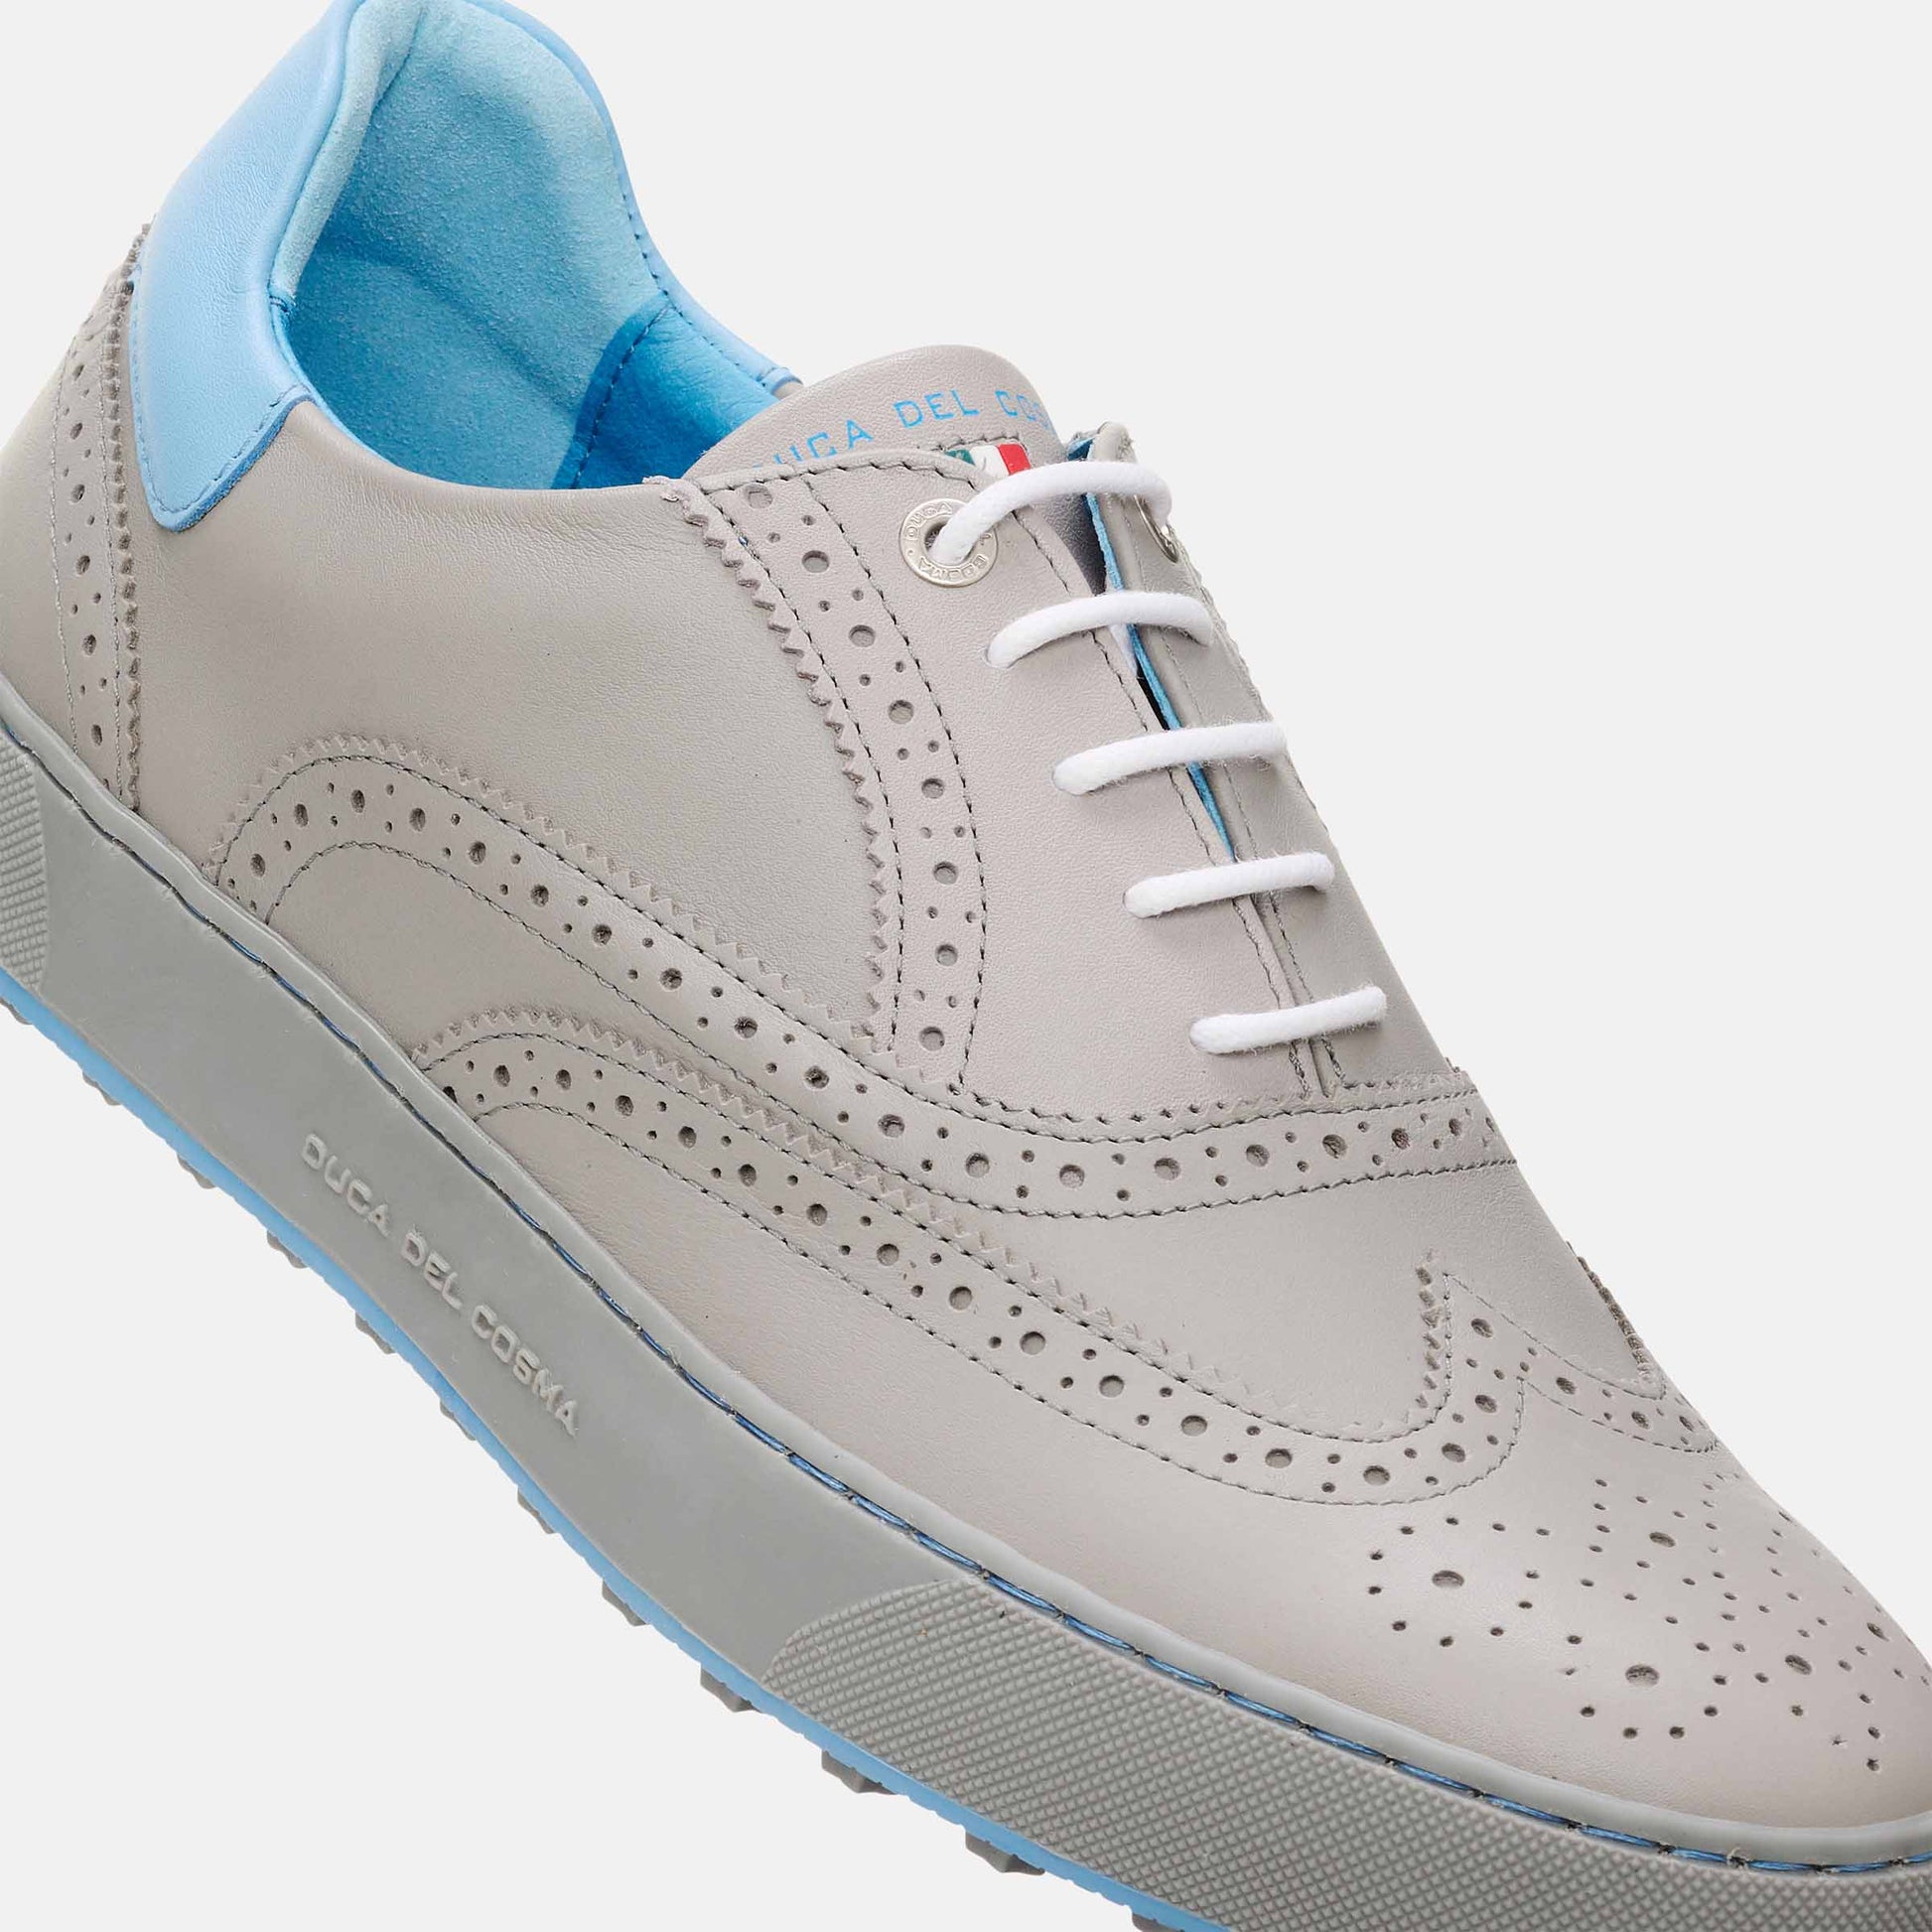 Grey Golf Shoes, Spikeless Golf Shoes, Duca del Cosma Men's Golf Shoes, Leather golf shoes.